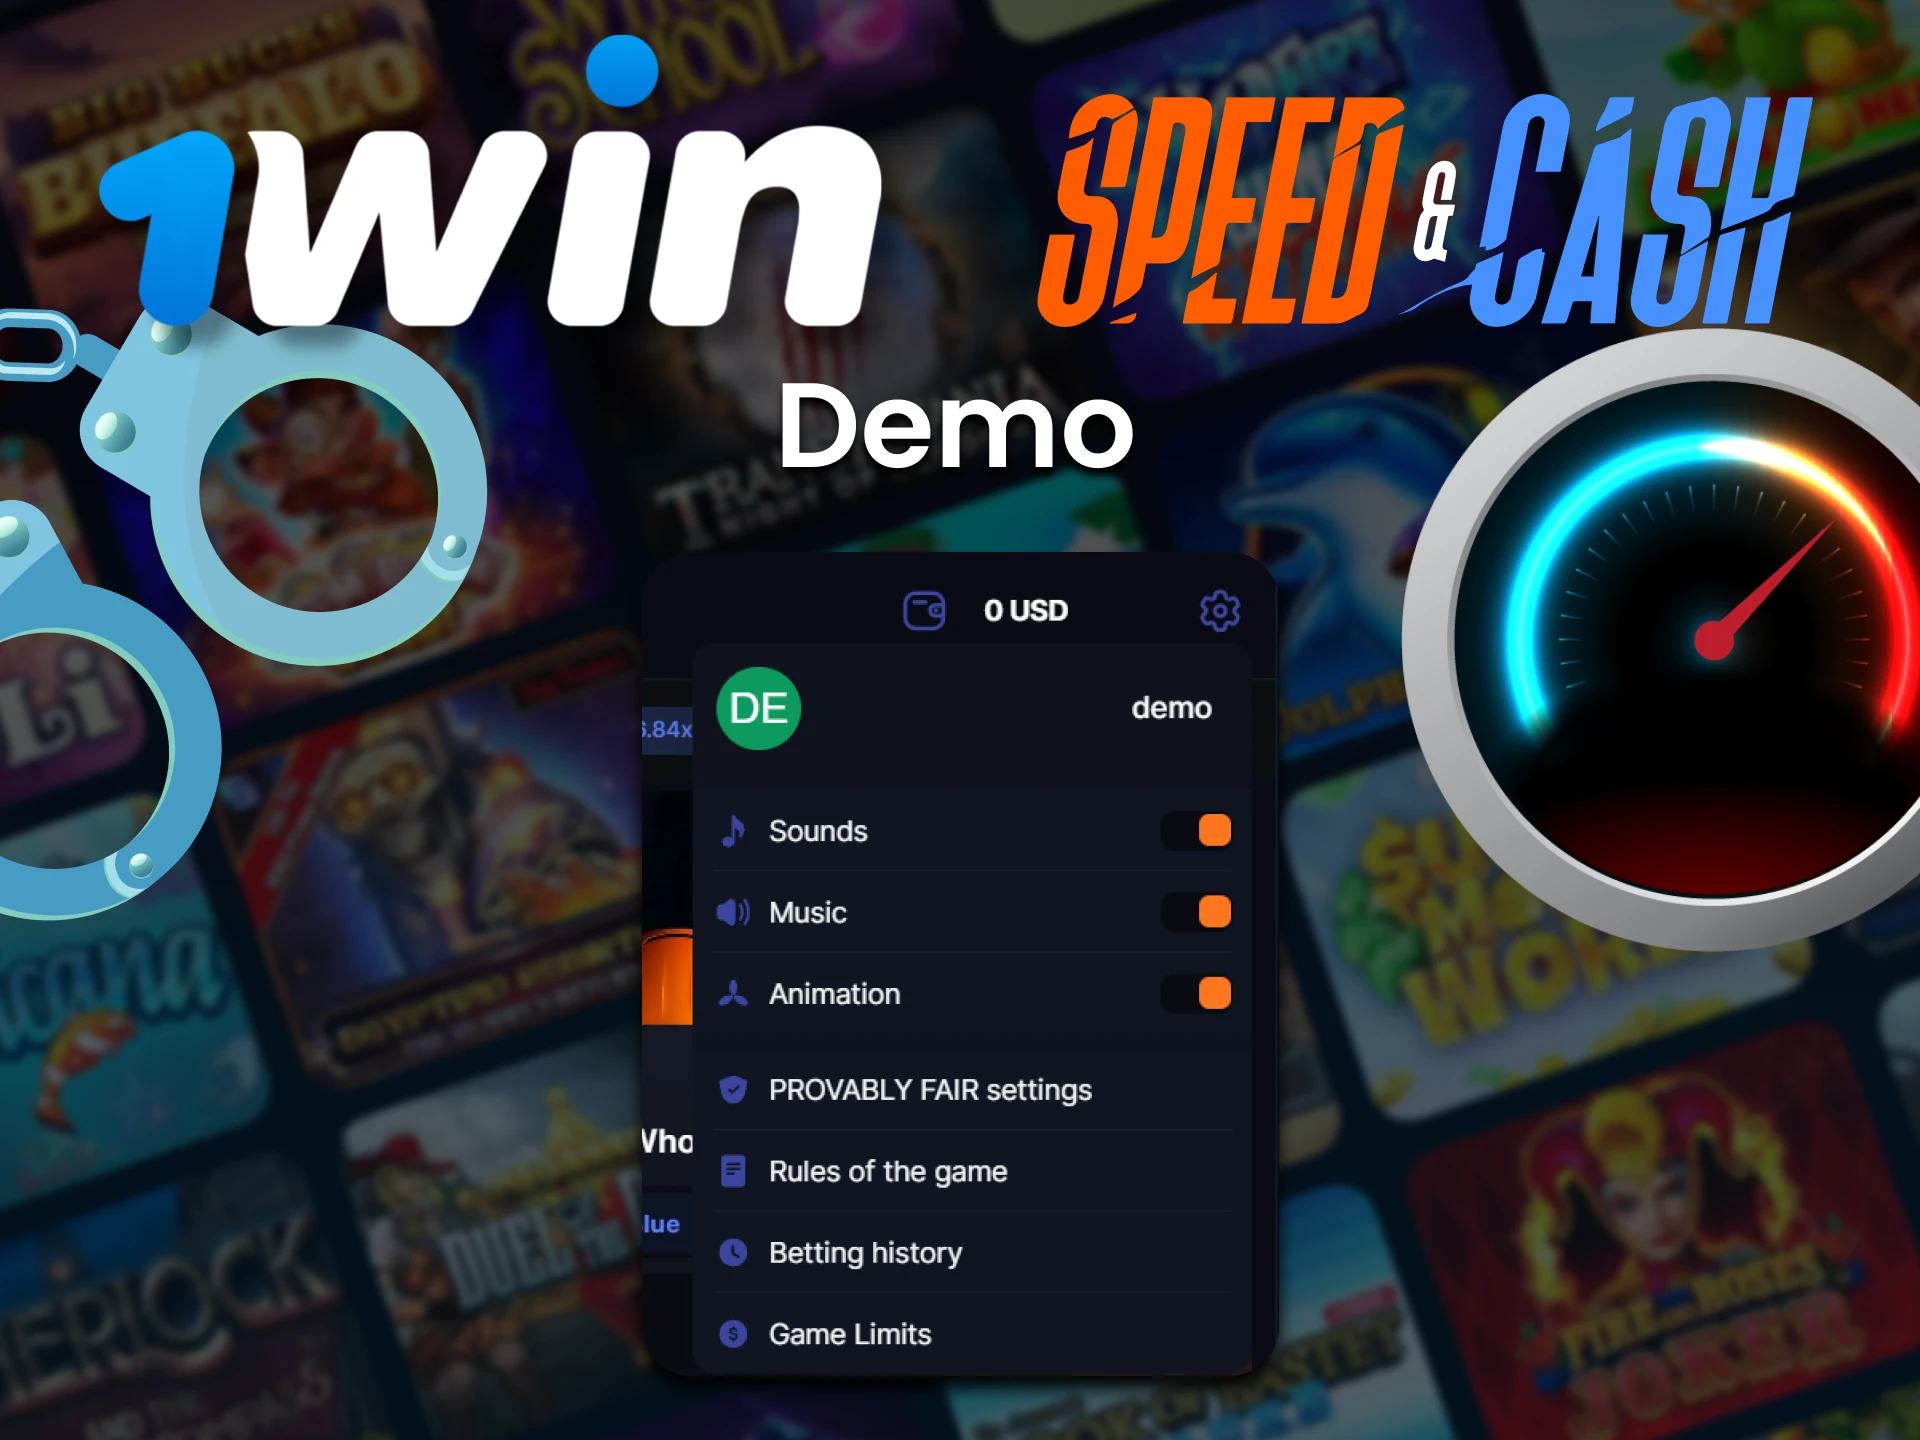 Try Speed & Cash demo version at 1Win to train your skills.